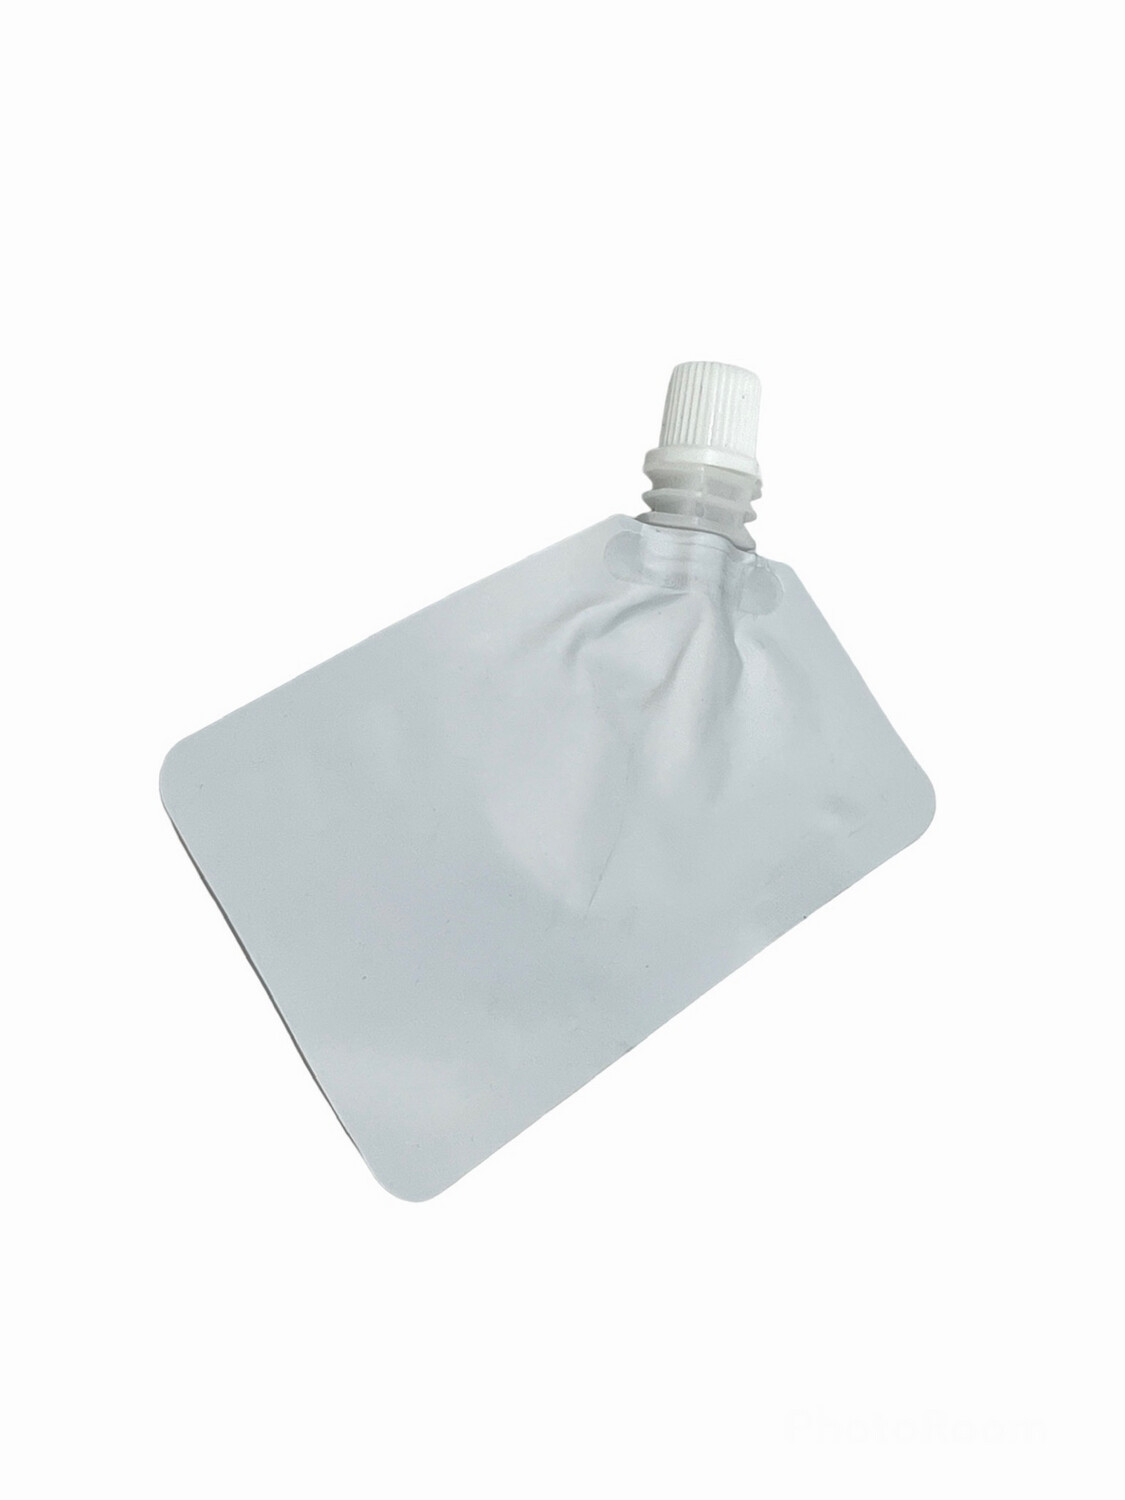 20 - 30ml White Pouch With Spout